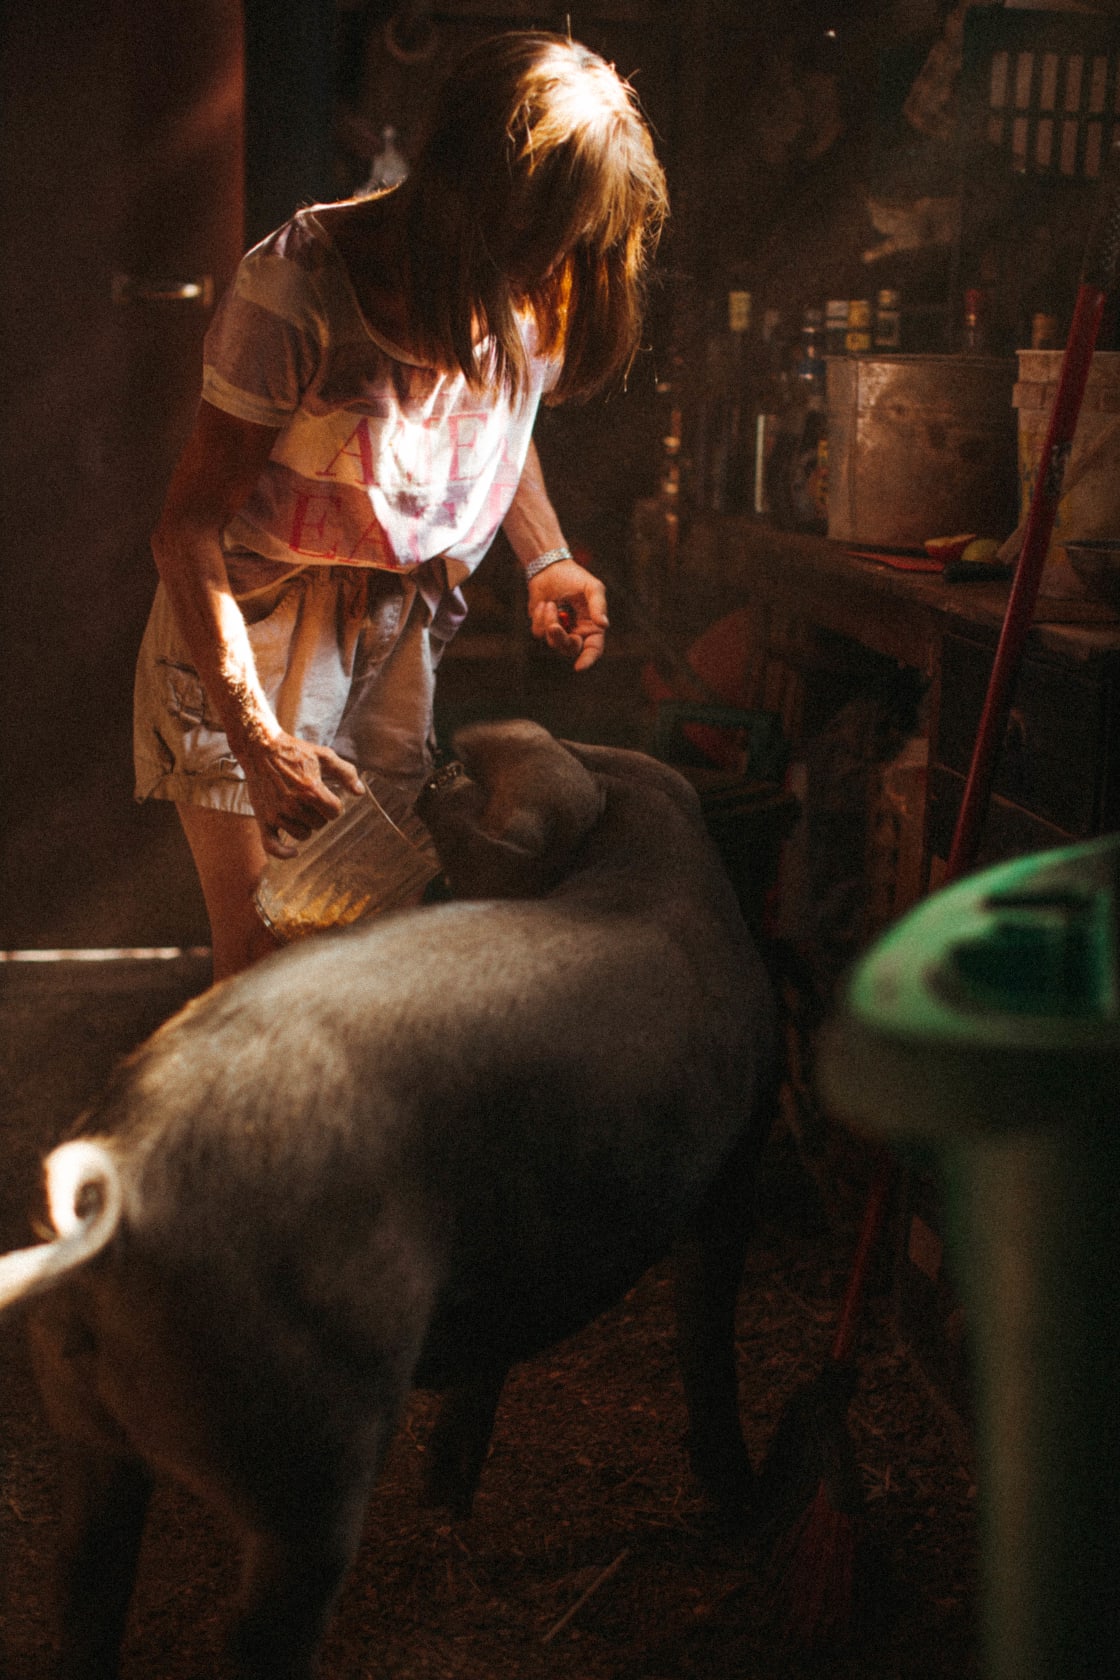 Eve feeding one of the pigs, Rock & Roll.